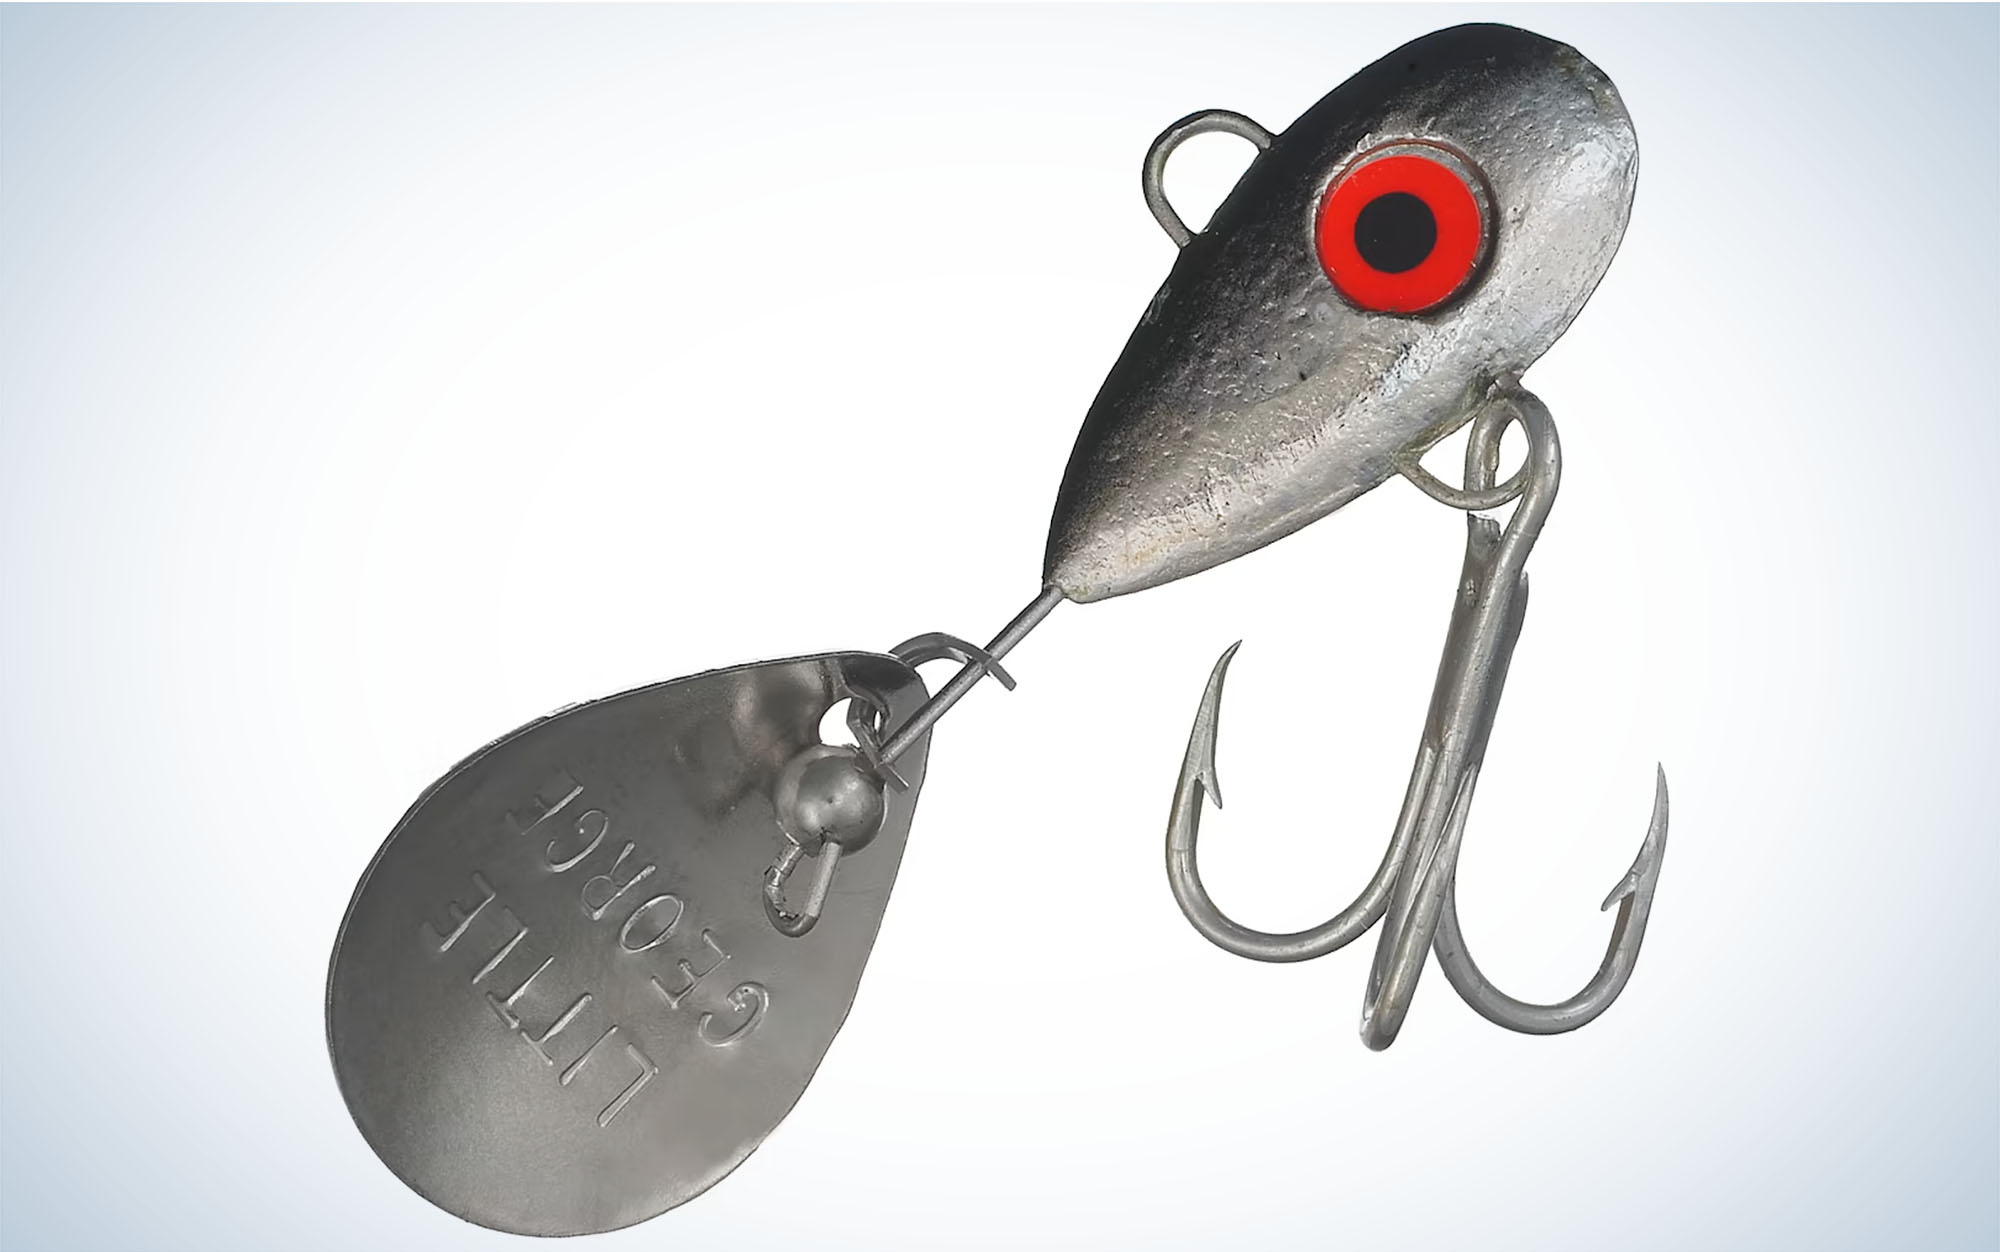 The Mann's The Little George Spoons is one of the best vintage lures.